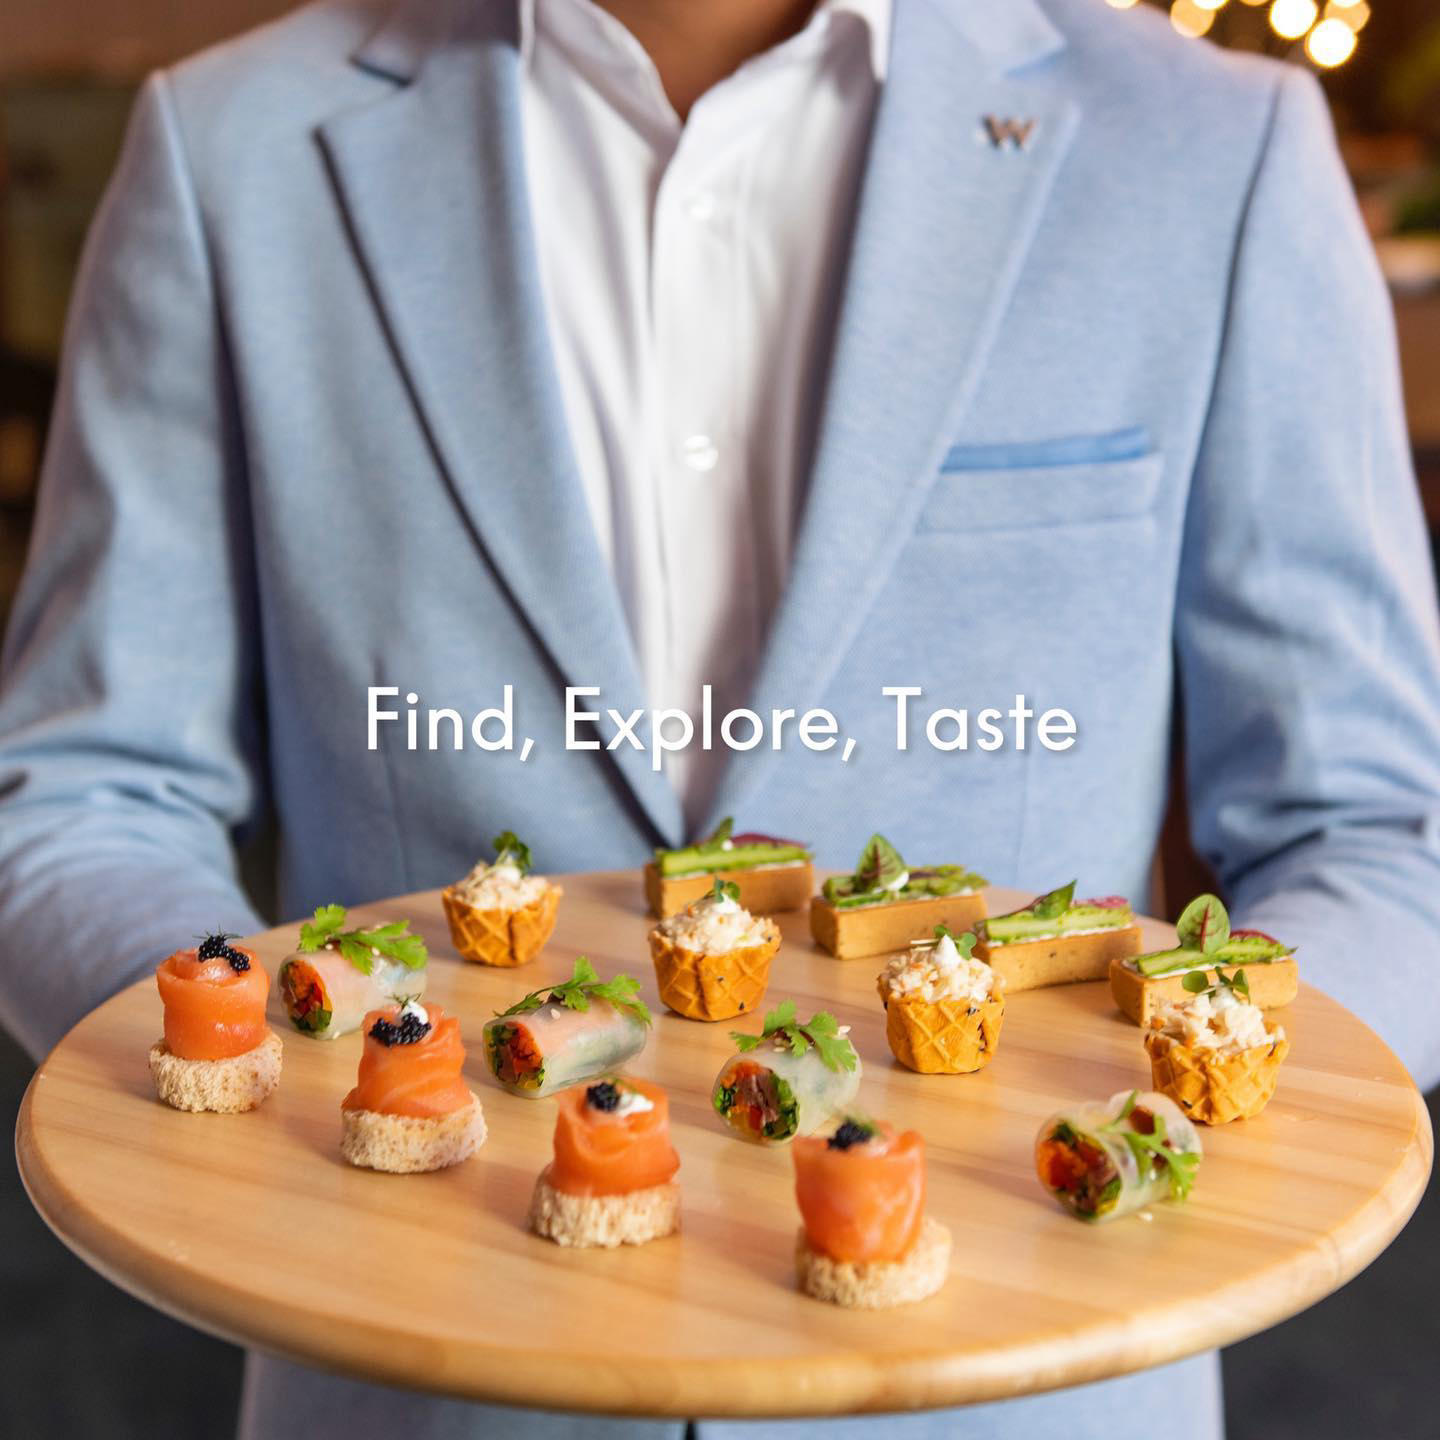 W Doha Hotel & Residences - #wdohacatering adding more flavors to your events